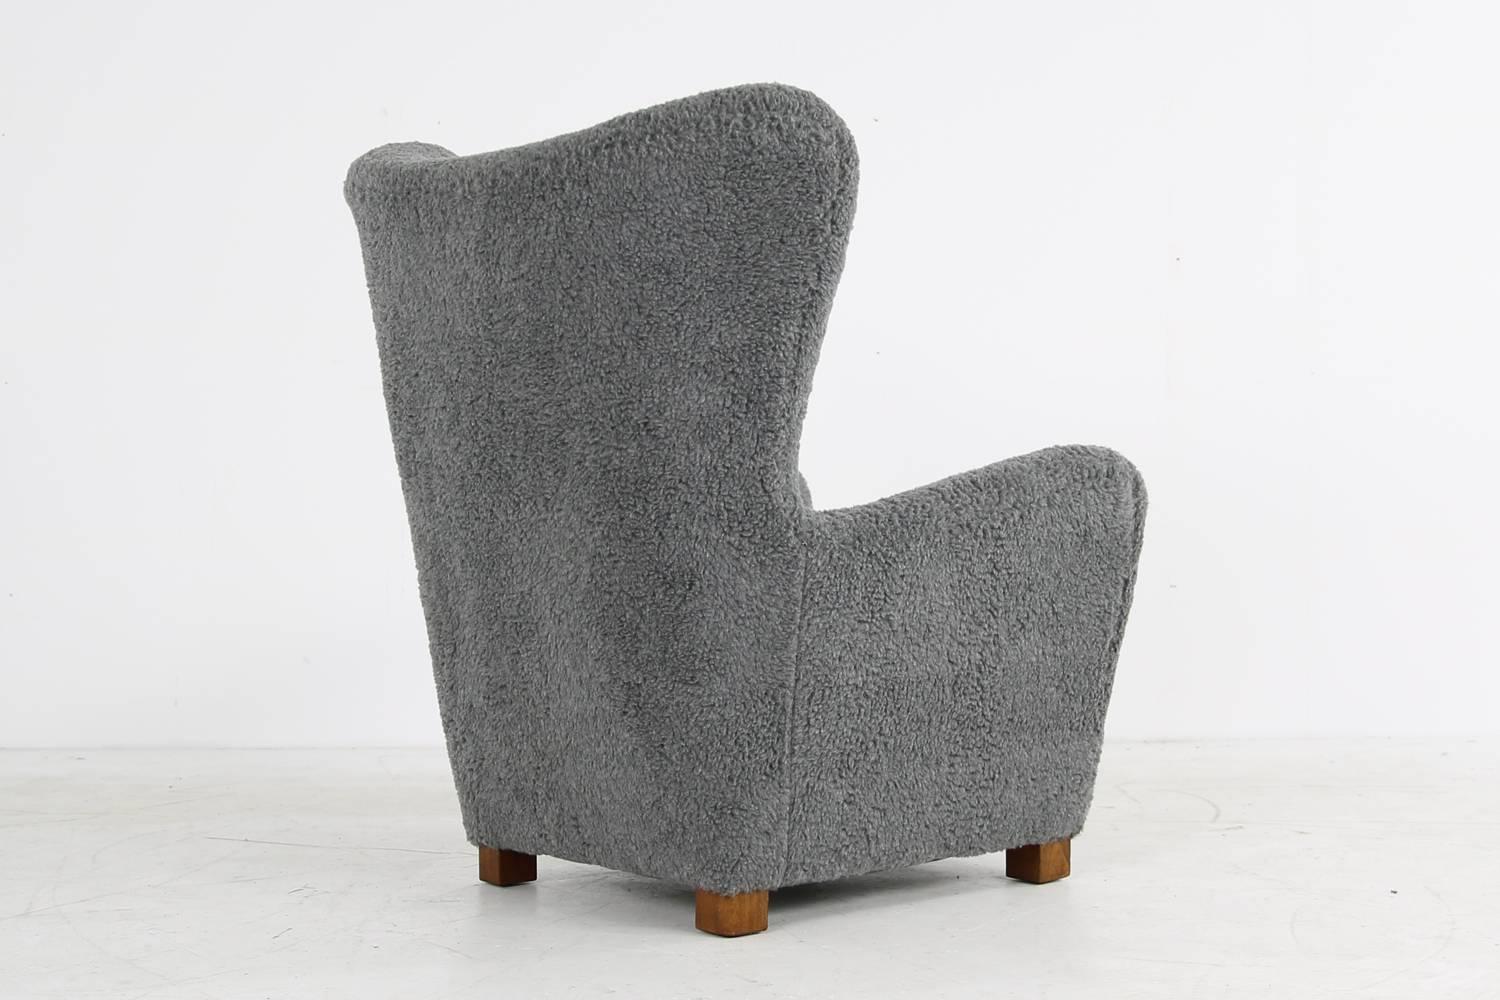 Beautiful Teddy bear fur covered wingchair from Denmark, early 1950s attributed to Thorald Madsen or Flemming Lassen, very unique shape, large size, heavy weight. Solid stained beechwood legs. Great upholstery and buttons in the backrest. Design